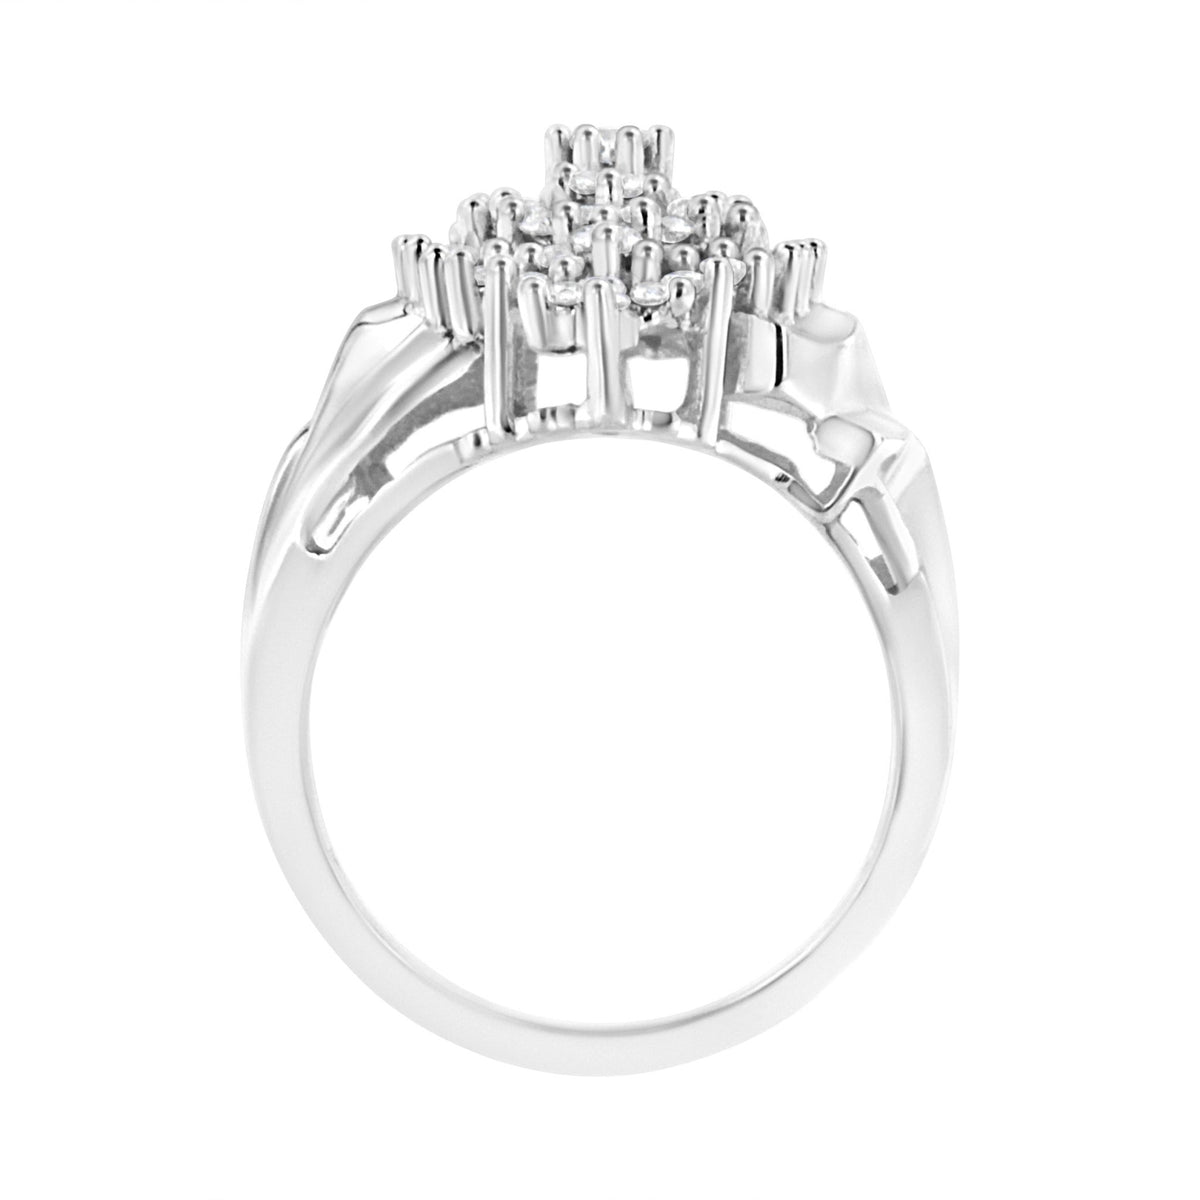 .925 Sterling Silver 1 cttw Lab Grown Diamond Cluster Ring (F-G Color, VS2-SI1 Clarity) - Size 7 - LinkagejewelrydesignLinkagejewelrydesign